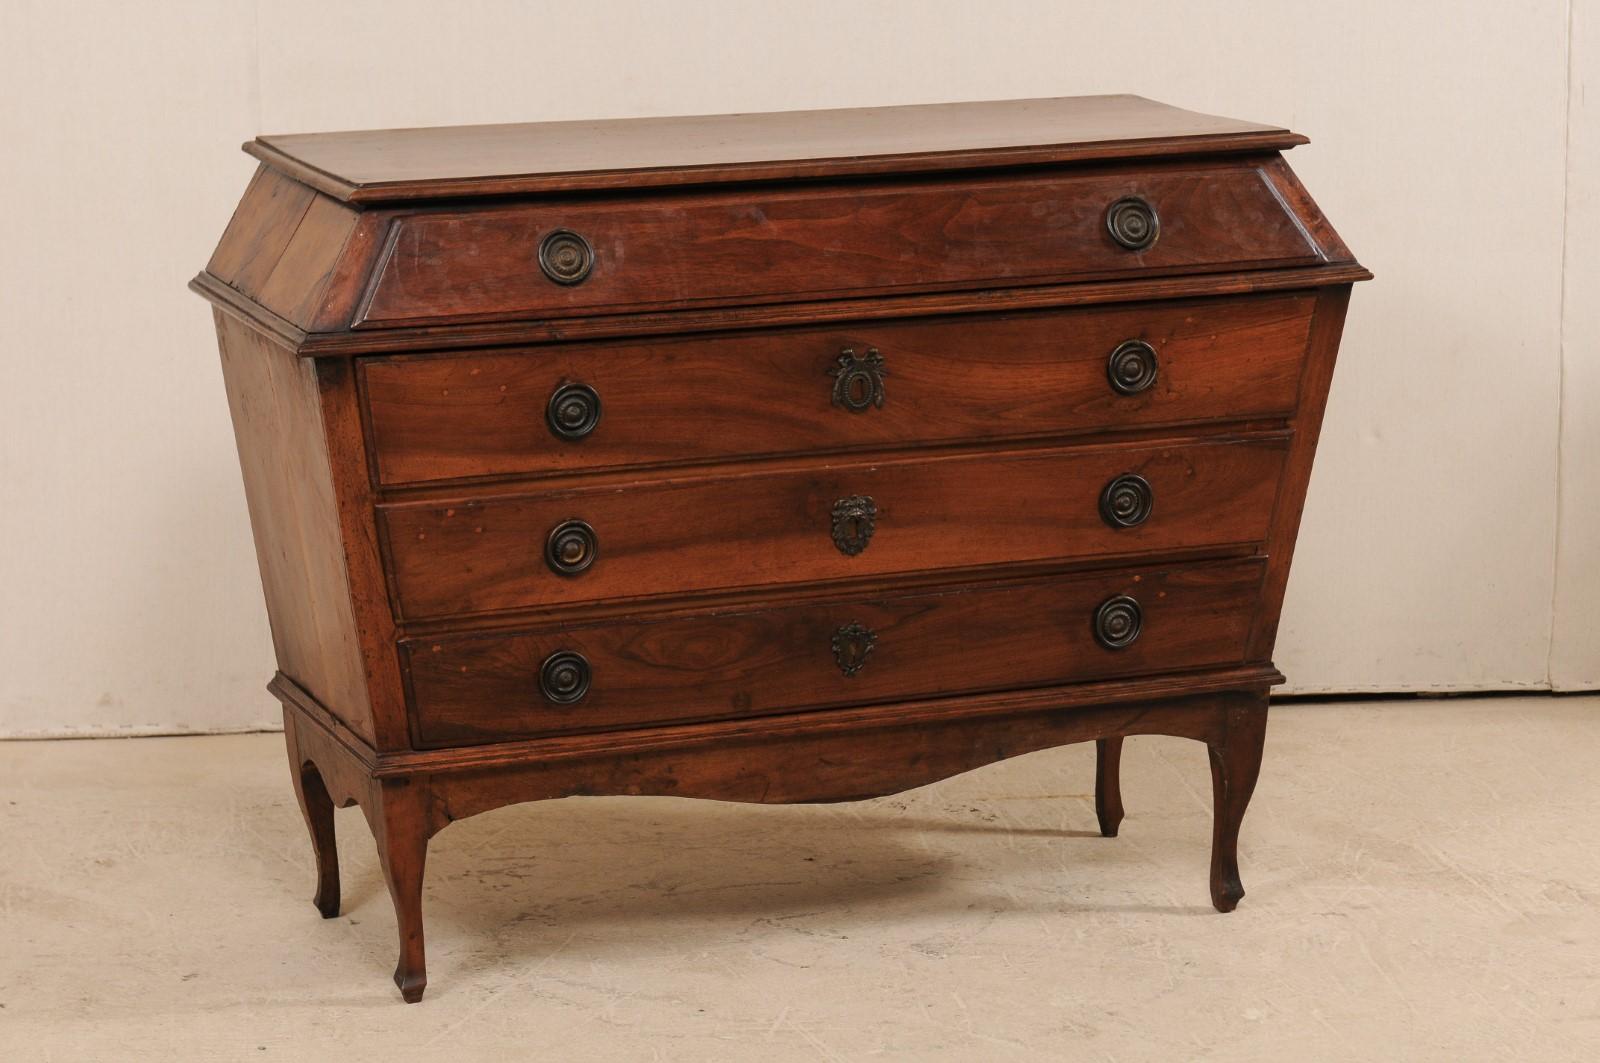 This uniquely designed Italian chest of drawers, from the late 18th-early 19th century, is perhaps one of the most beautiful pieces of furniture to pass through our doors! This antique Italian walnut commode features an unusual triangulated bombé